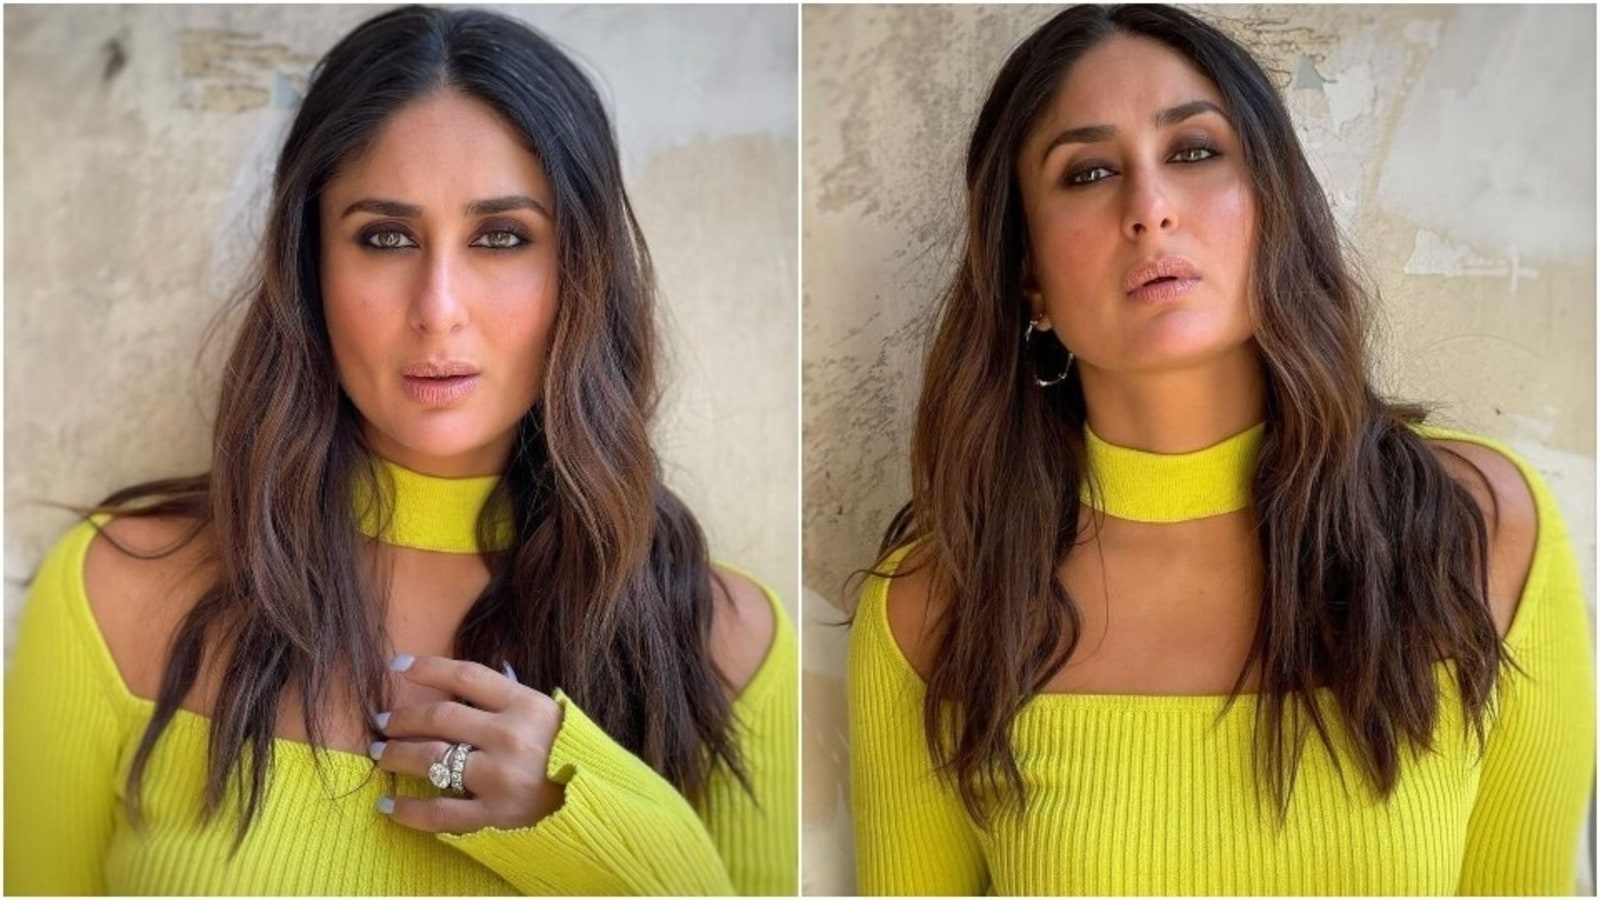 Kareena Kapoor looks bewitching in cut-out top and colourful skirt for new  shoot | Fashion Trends - Hindustan Times